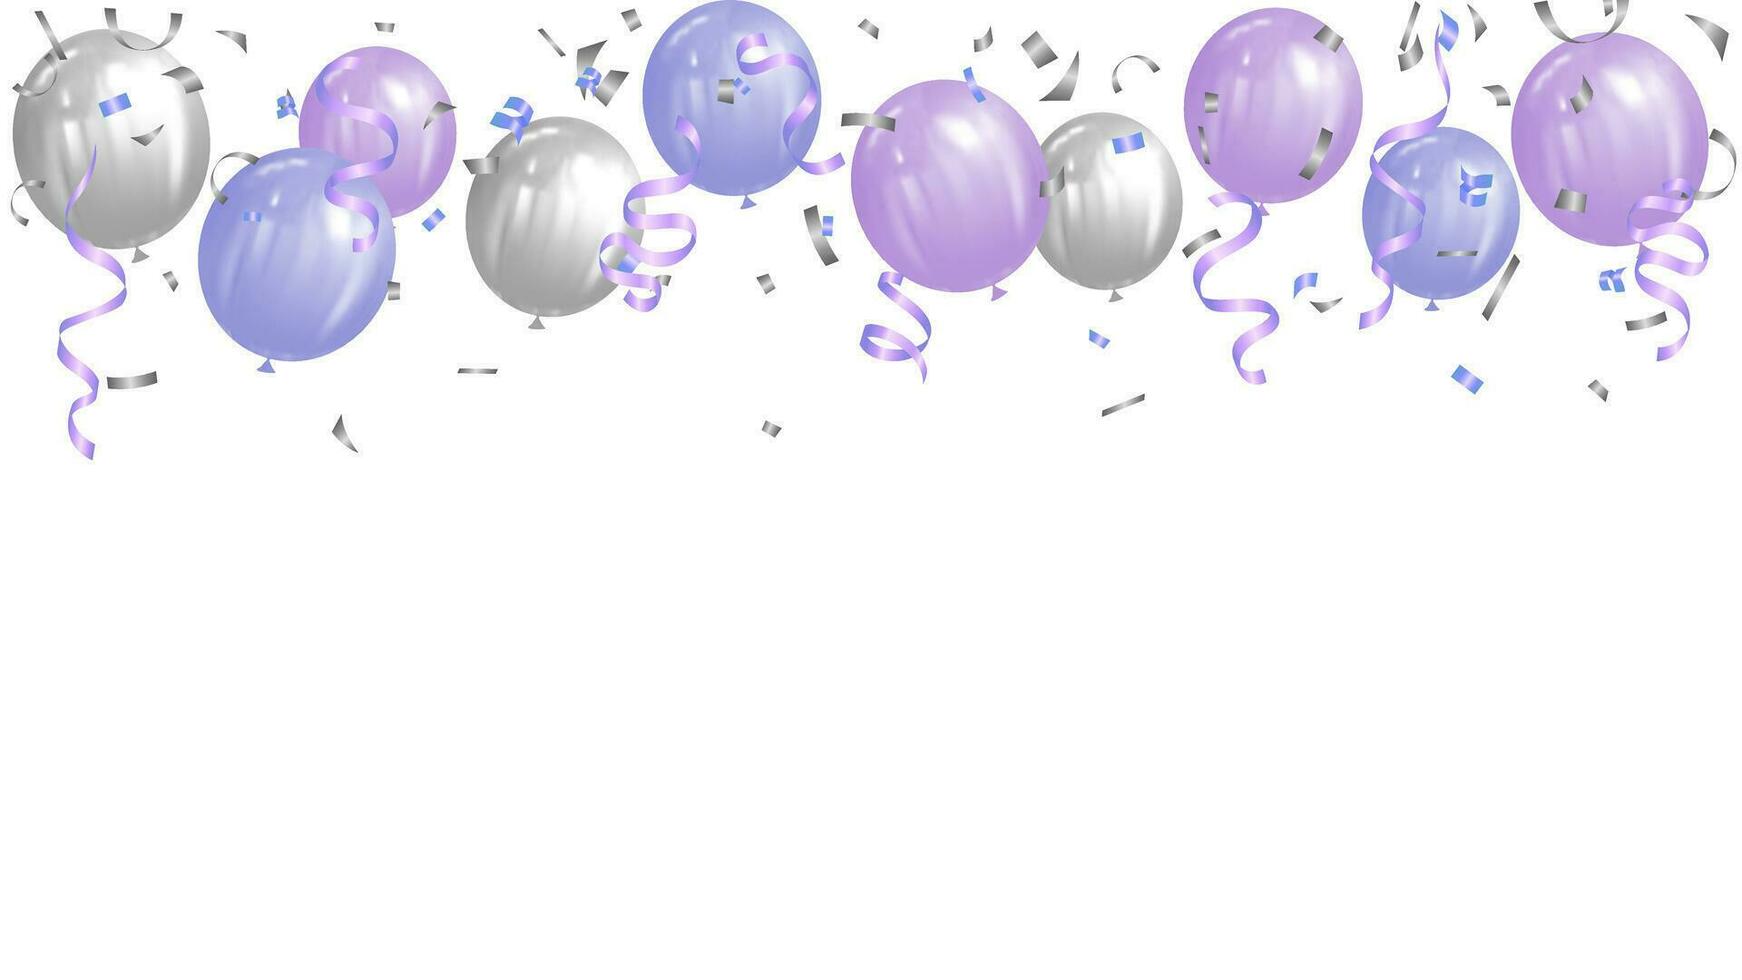 Happy birthday, celebration, holiday purple and silver balloons realistic vector illustration